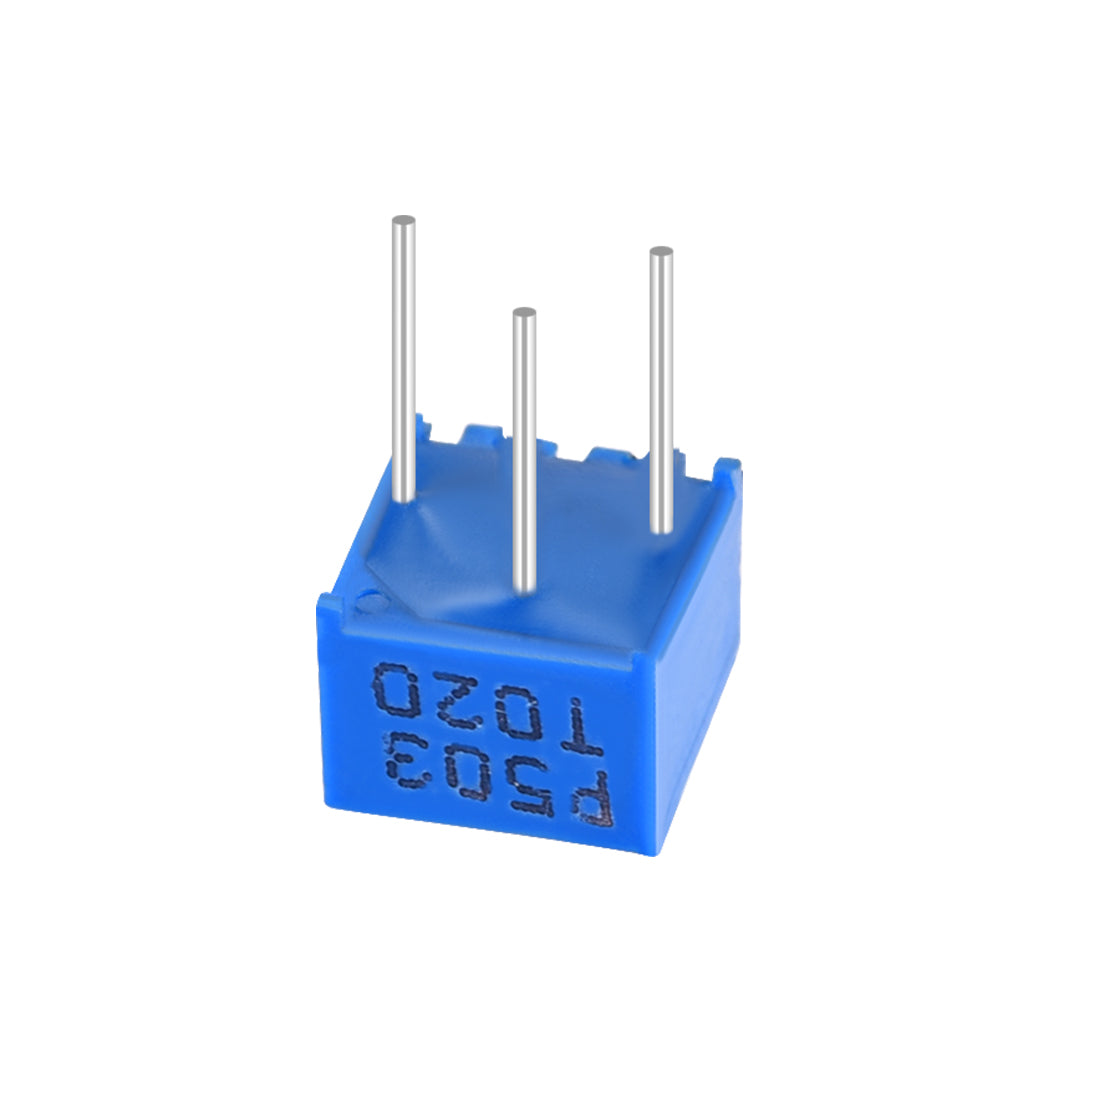 uxcell Uxcell 3362 Trimmer Potentiometer 50K Ohm Top Adjustment Horizontal Variable Resistors 10Pcs